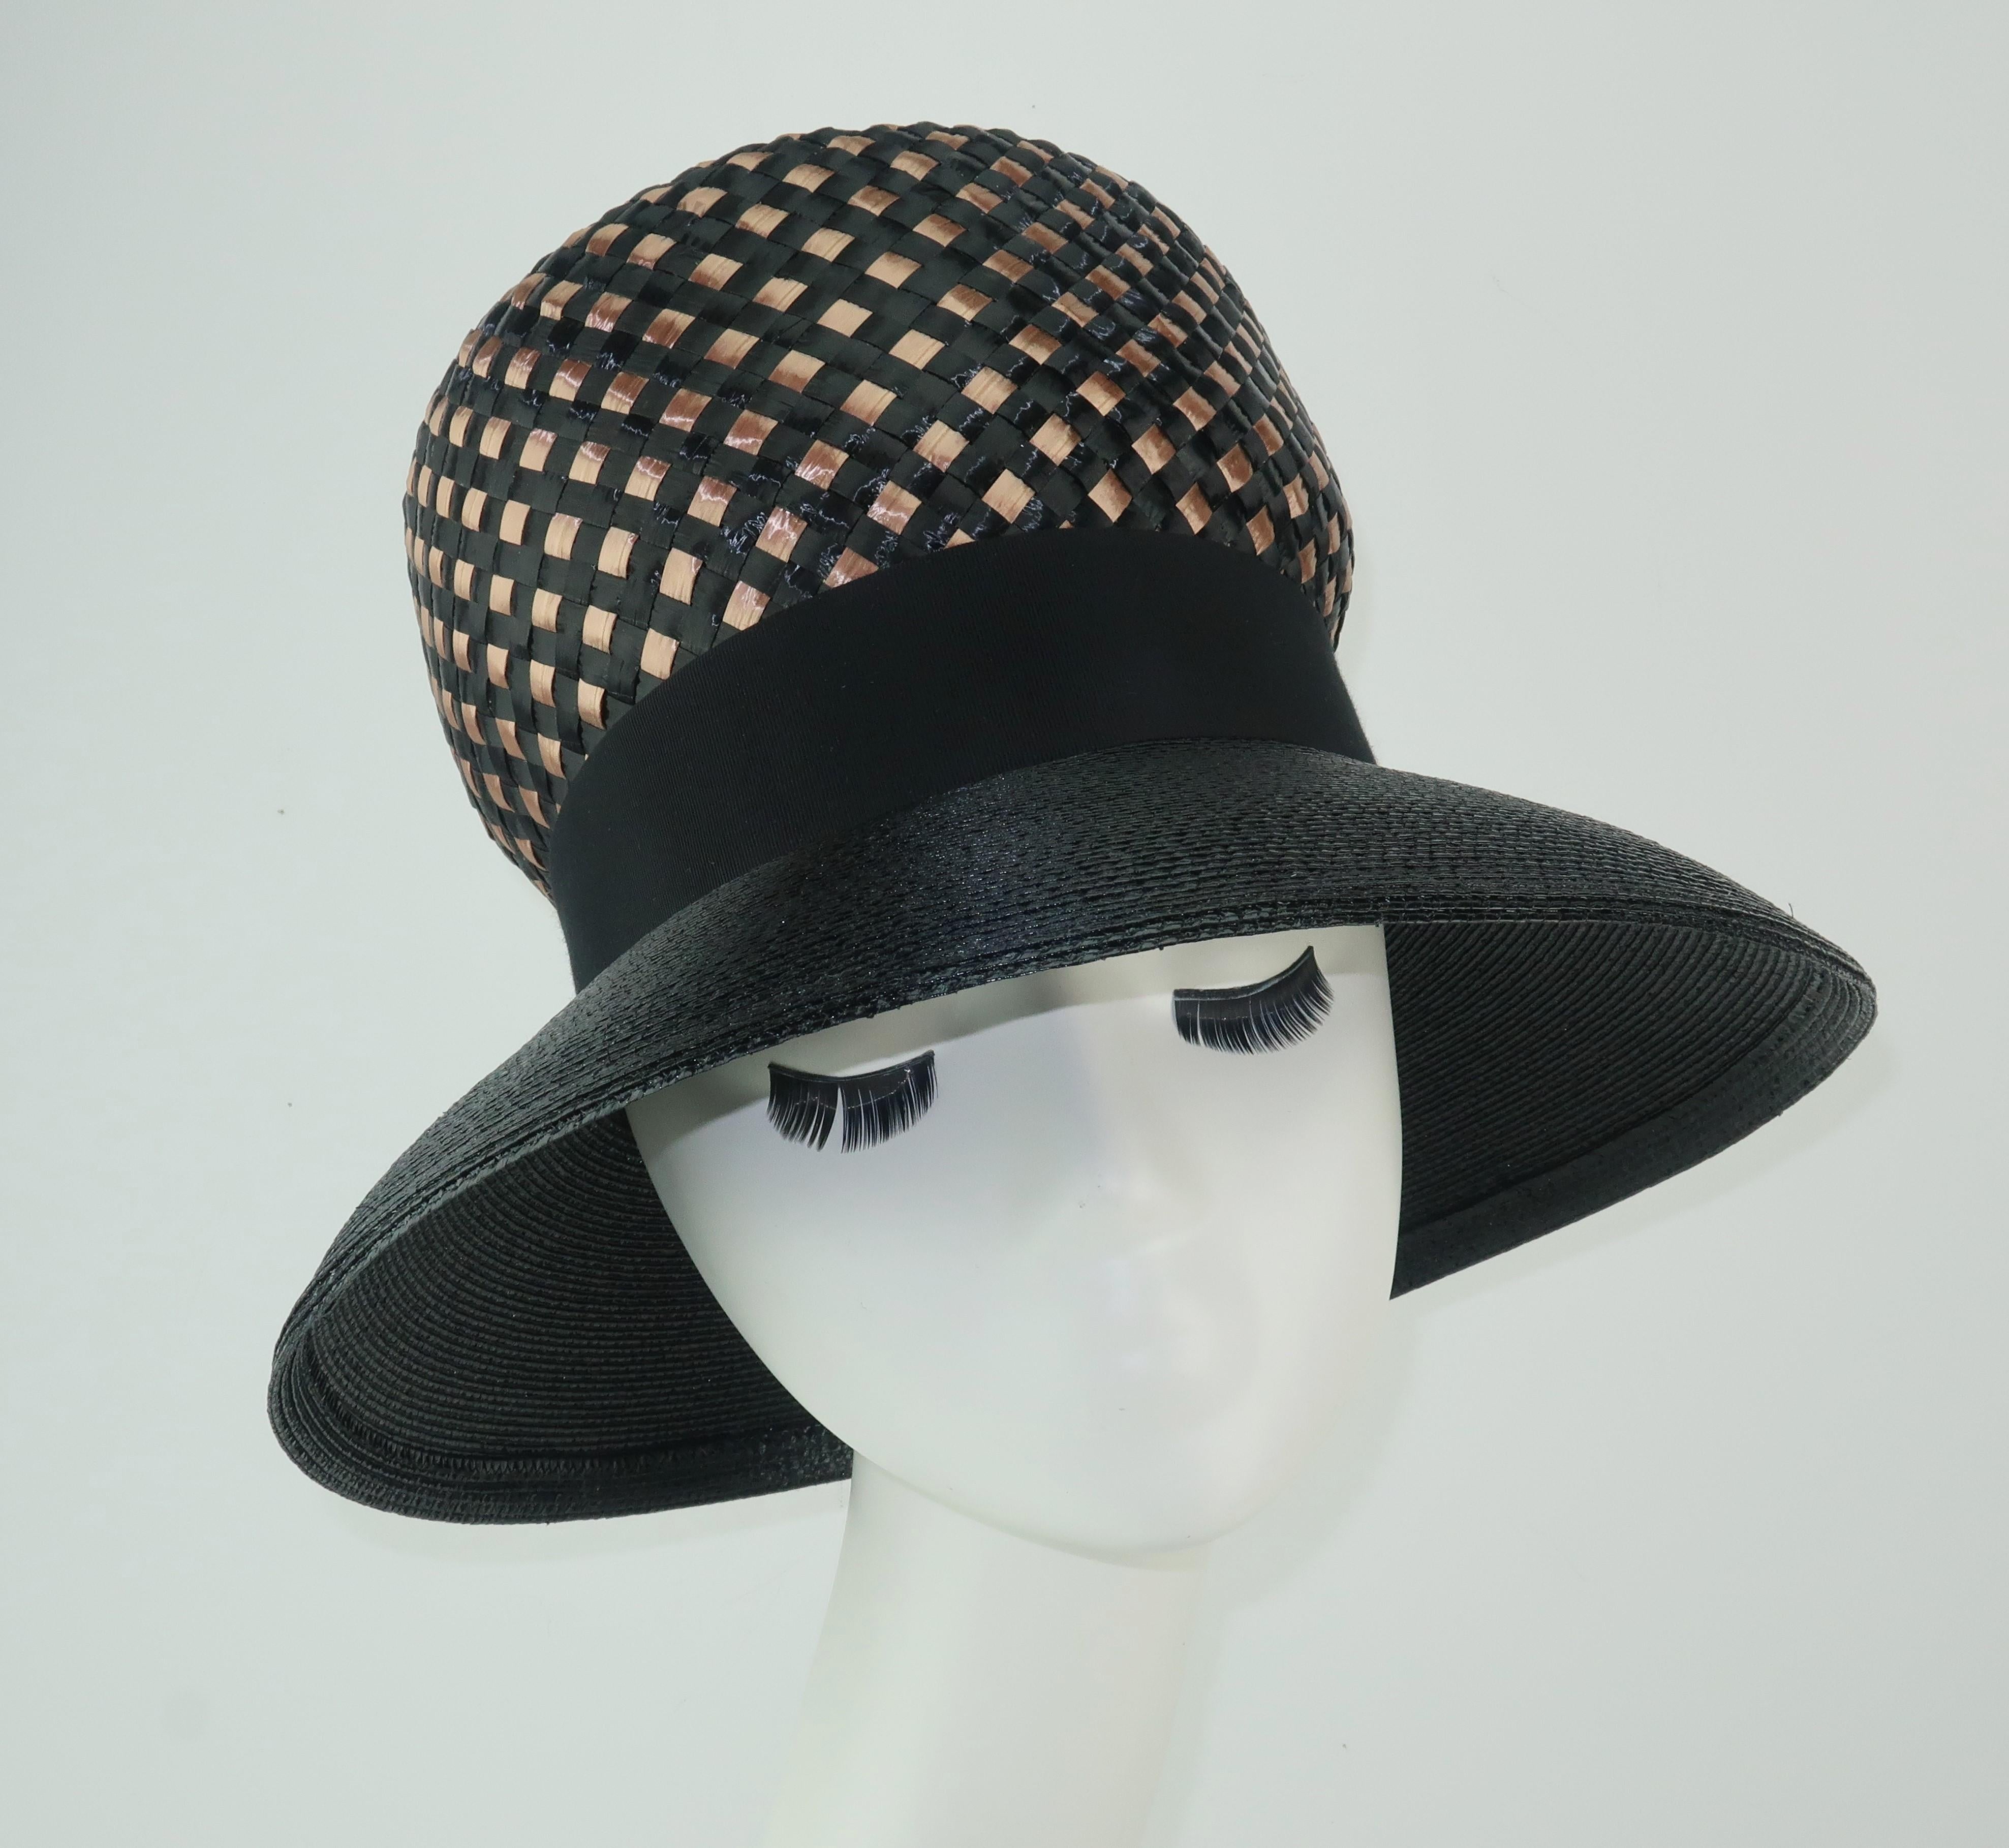 This Gwenn Pennington design is a 1960's example of throwing shade.  The fabulous silhouette with a sloping brim and exaggerated crown was a high style take on mod fashion.  Fabricated with a raffia weave, quality straw and a grosgrain ribbon accent